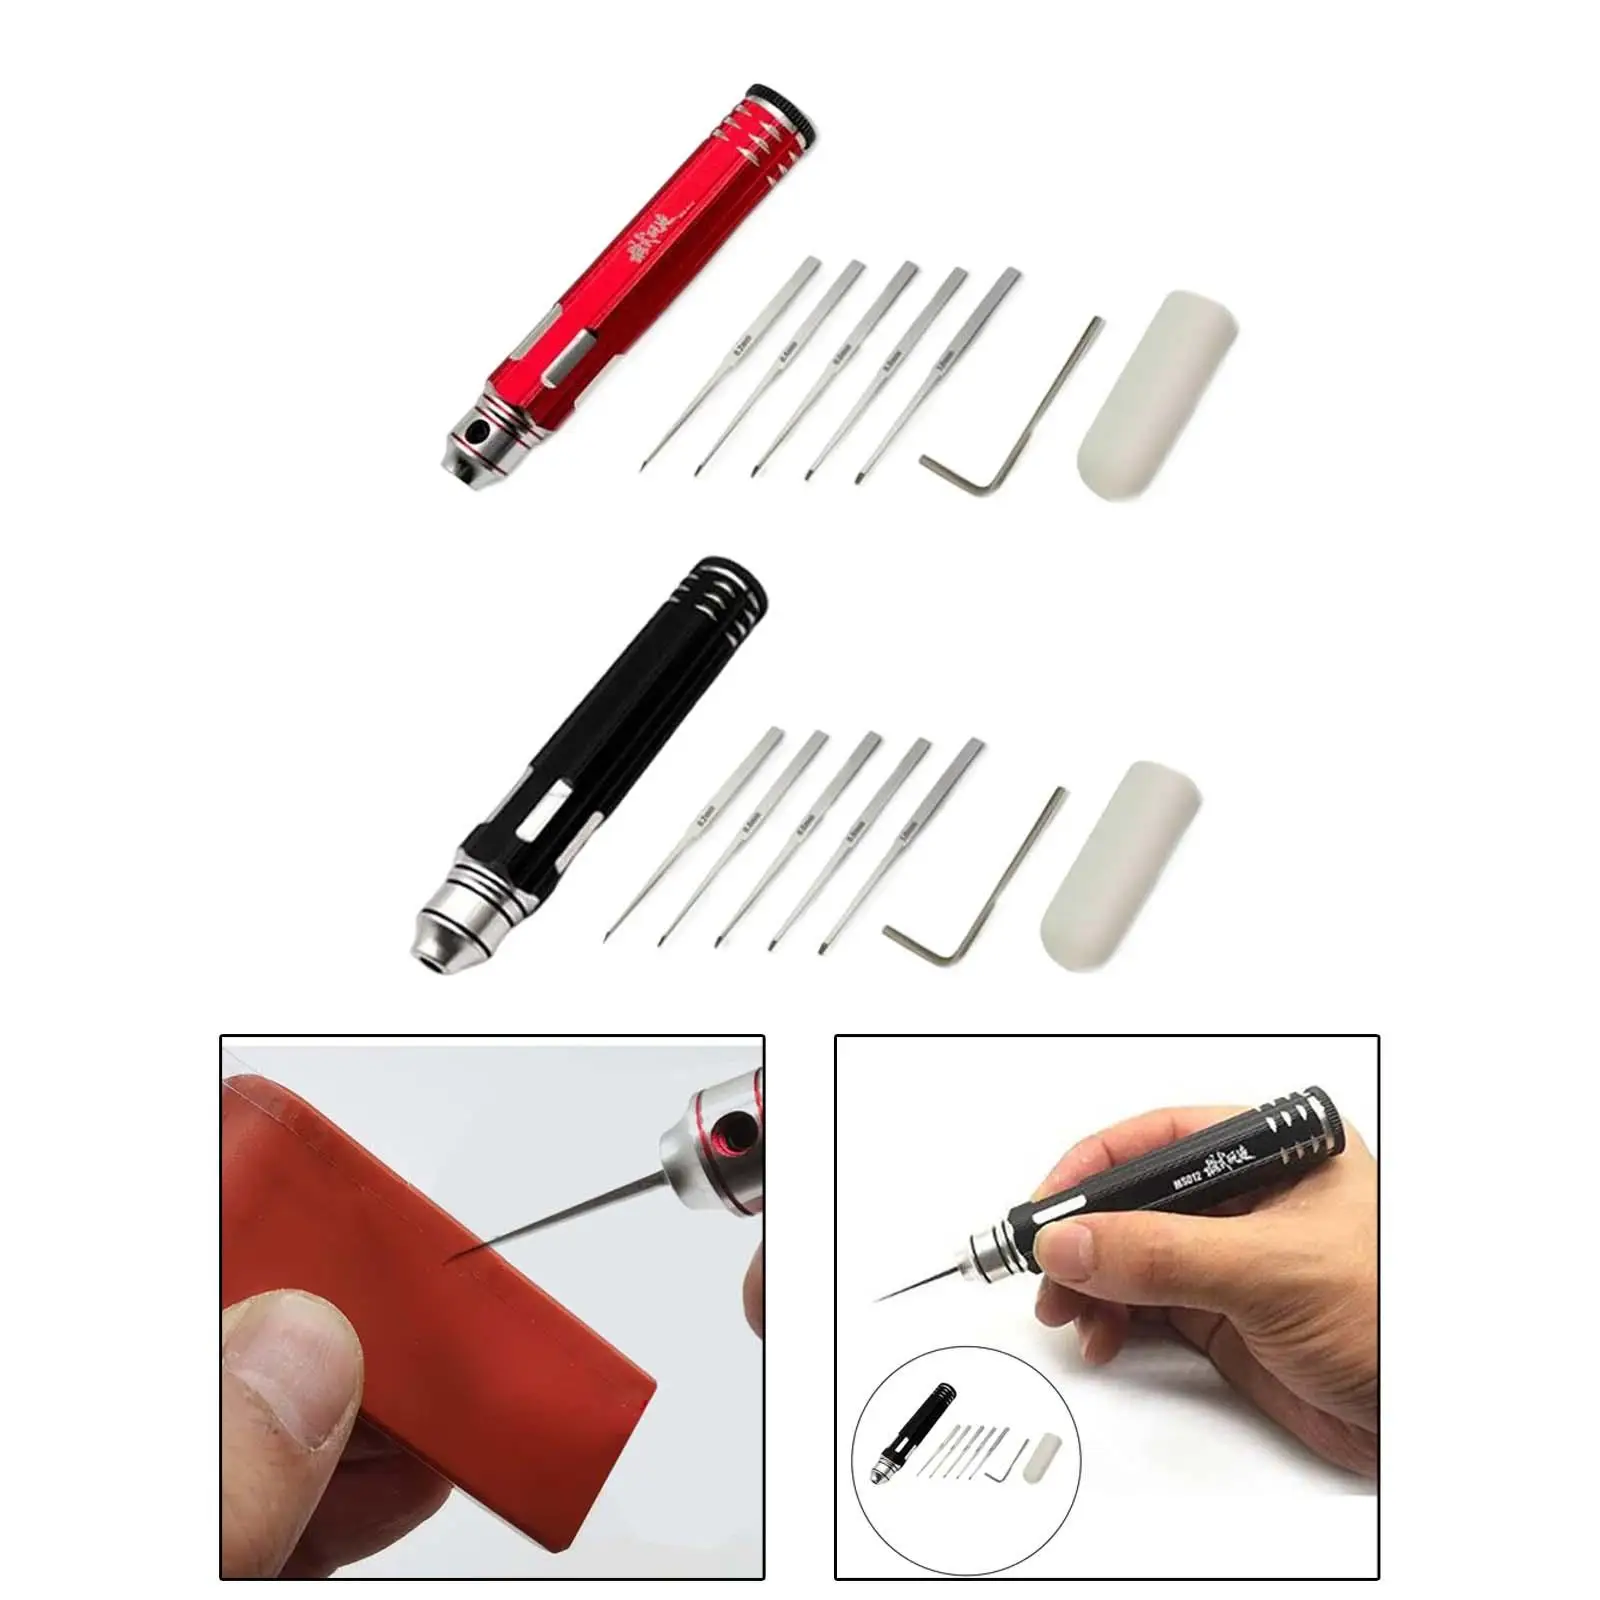 Model Scriber Nicking Tool Kit Model Cutting Tools Scribe Line Tool with 0.2/0.4/0.6/0.8/1mm Blade for Hobby Building Repairing